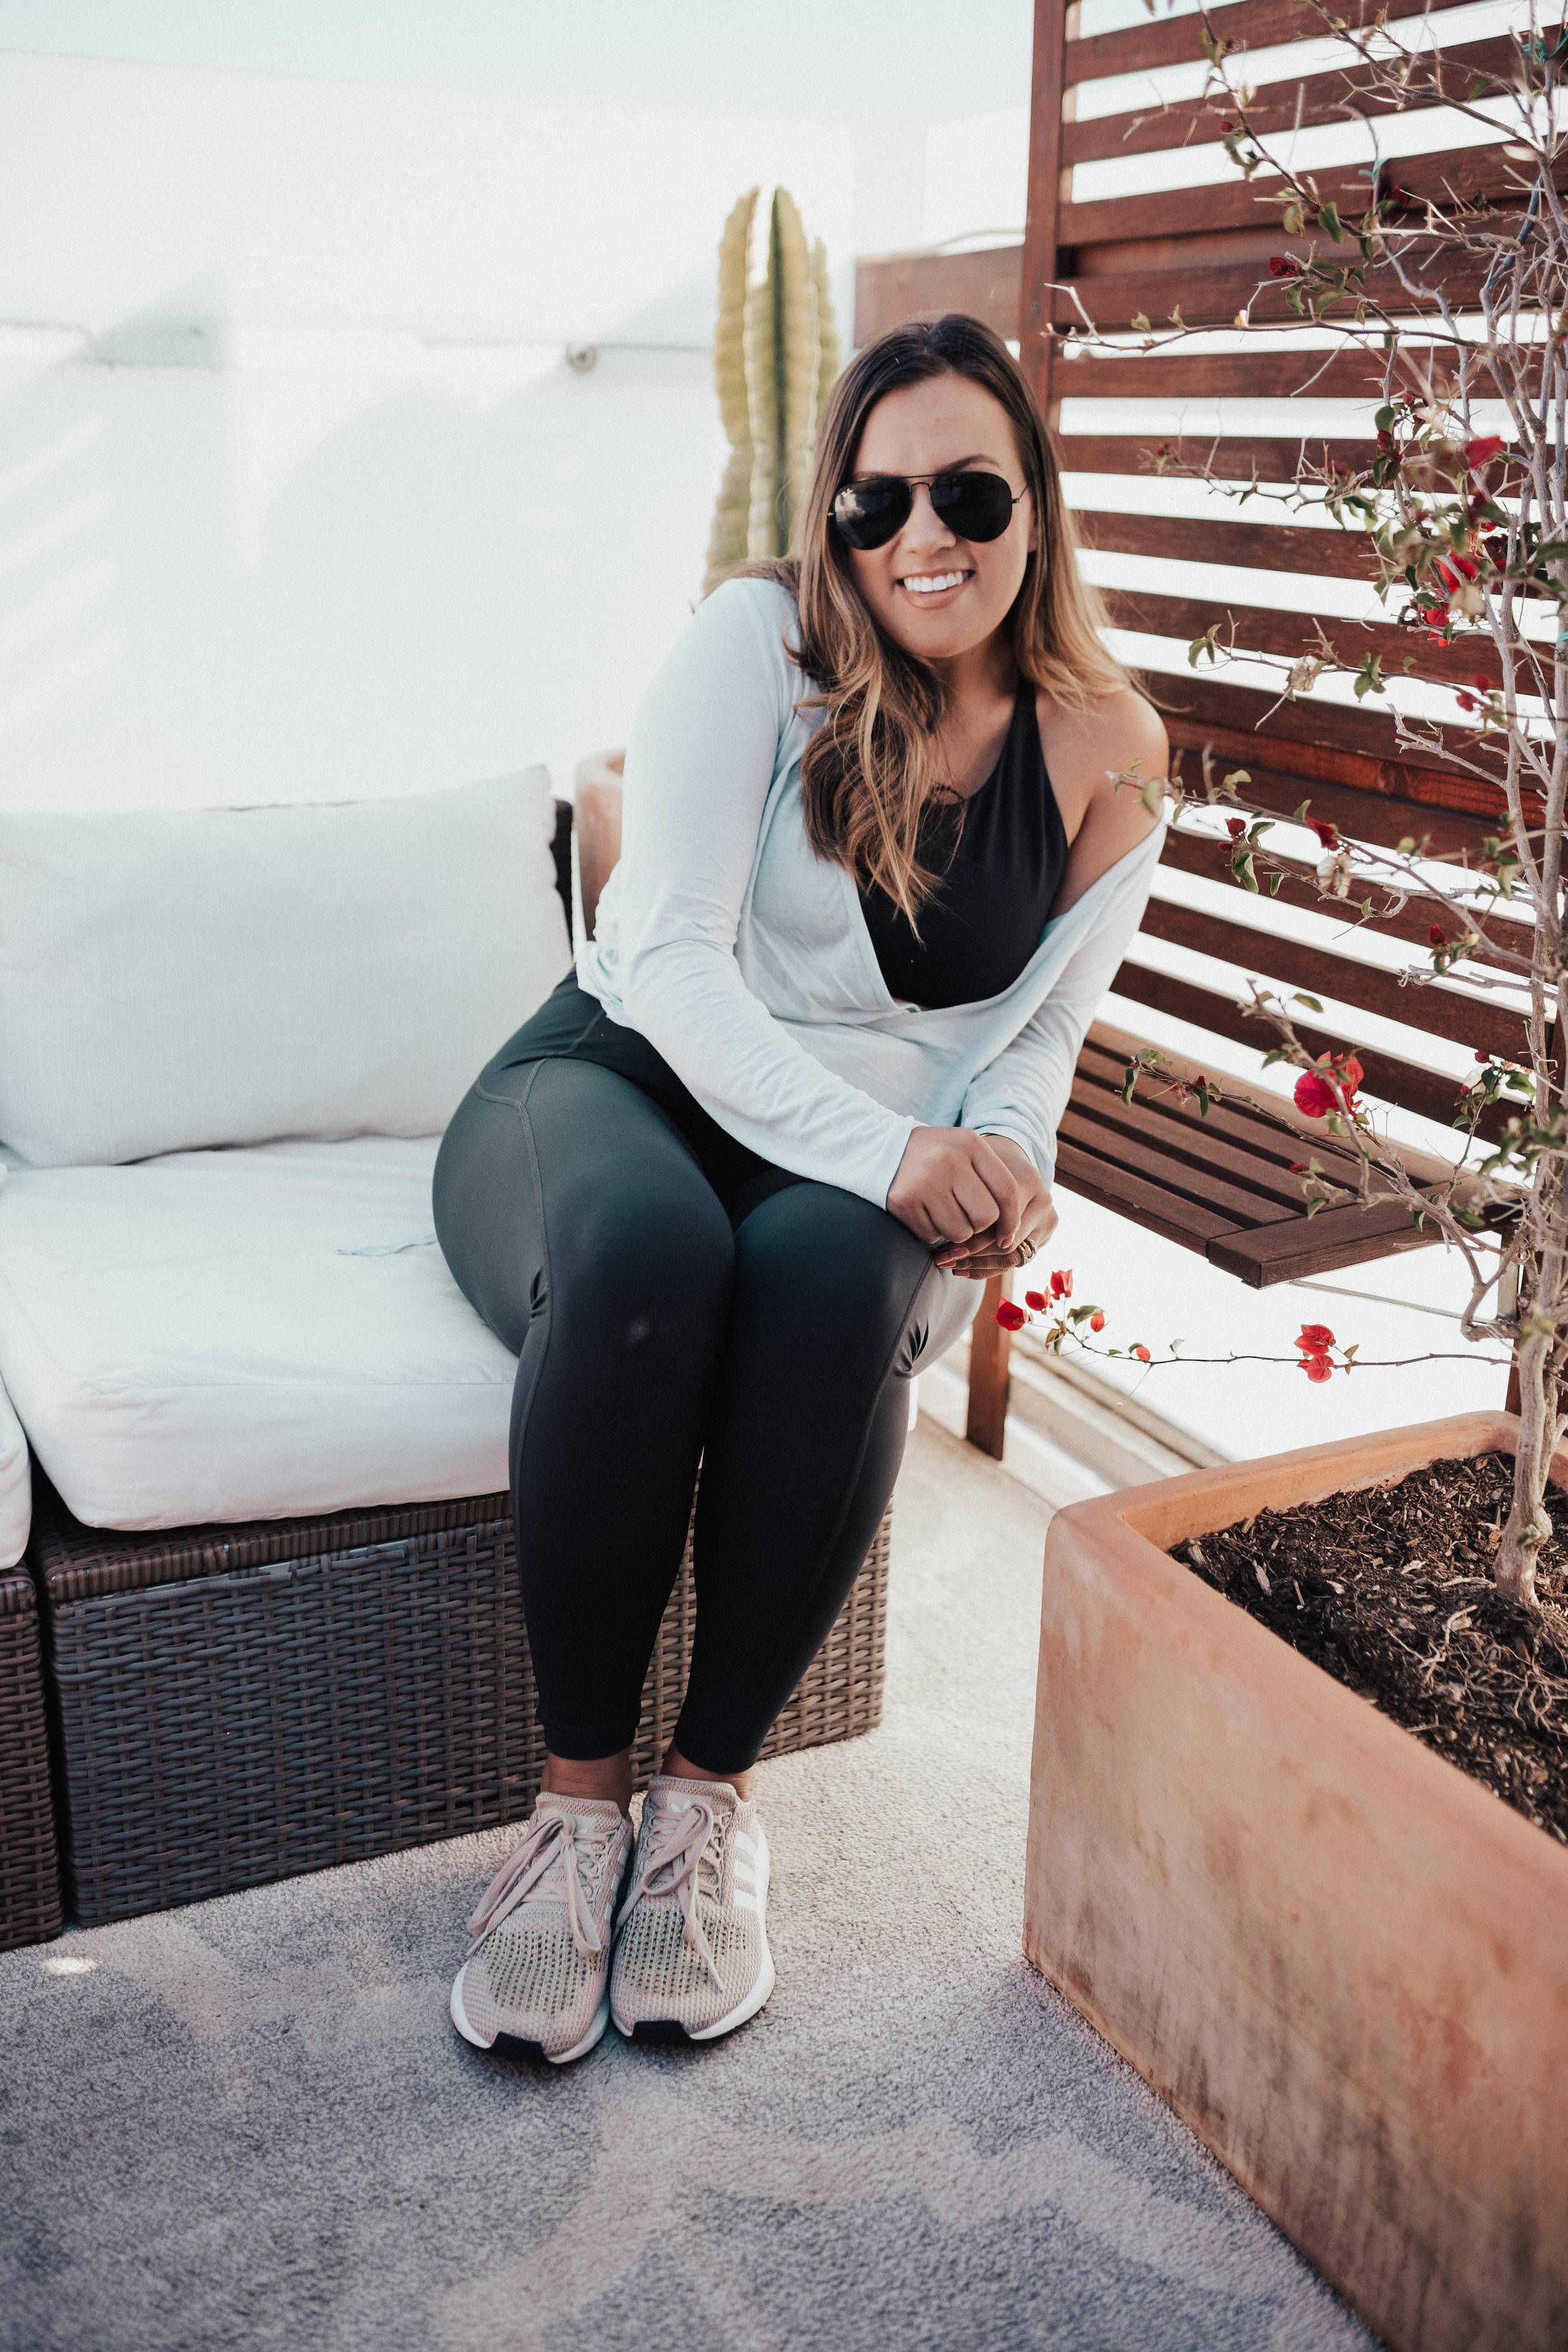 Ashley Zeal talks about her new favorite leggings from Girlfriend Collective: A Brand with Integrity. Shop this brand without feeling any remorse!